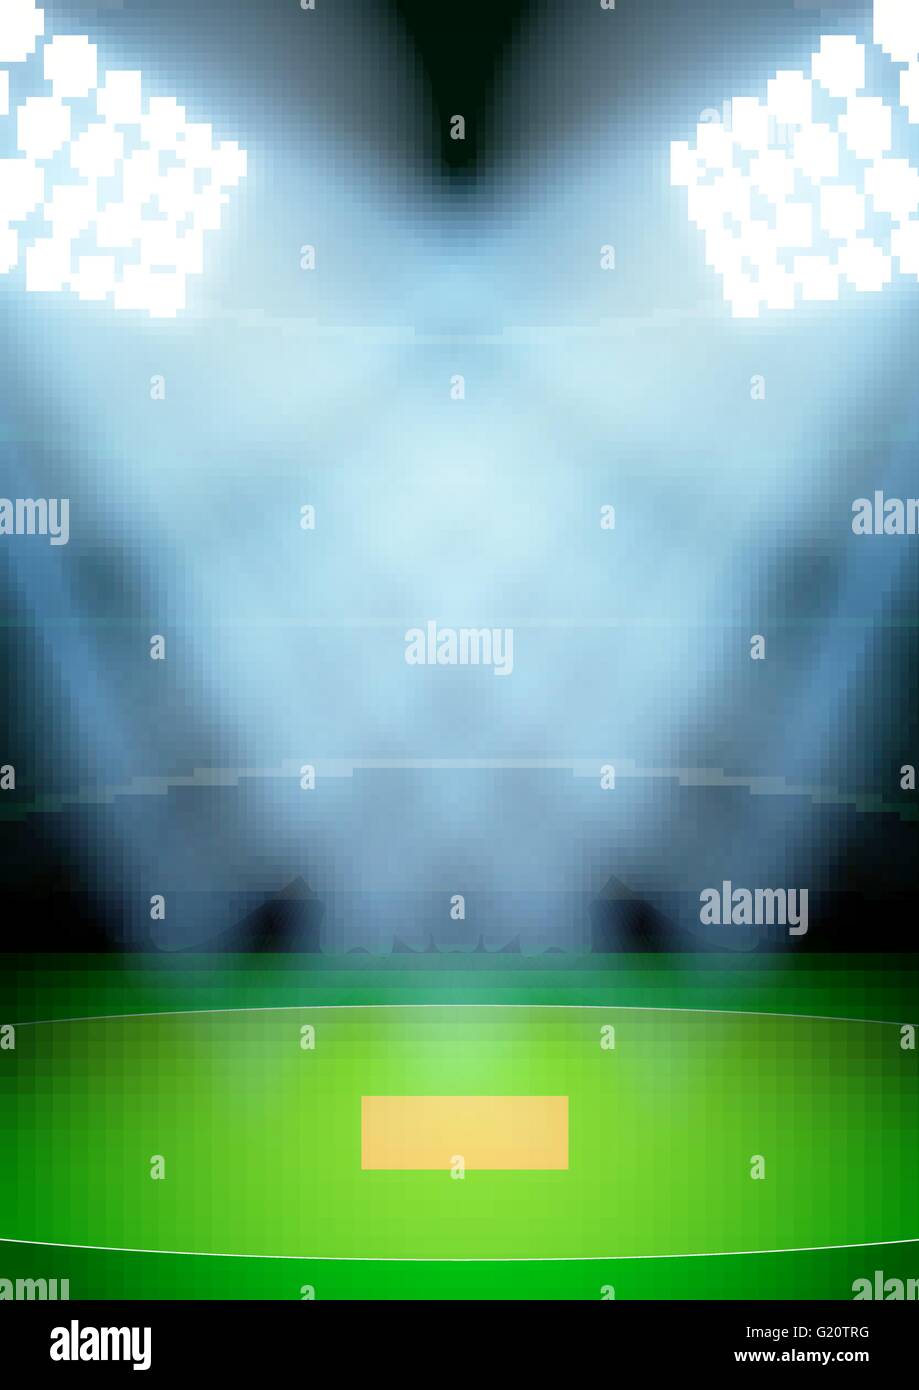 Background for posters night cricket stadium in the spotlight. Vector